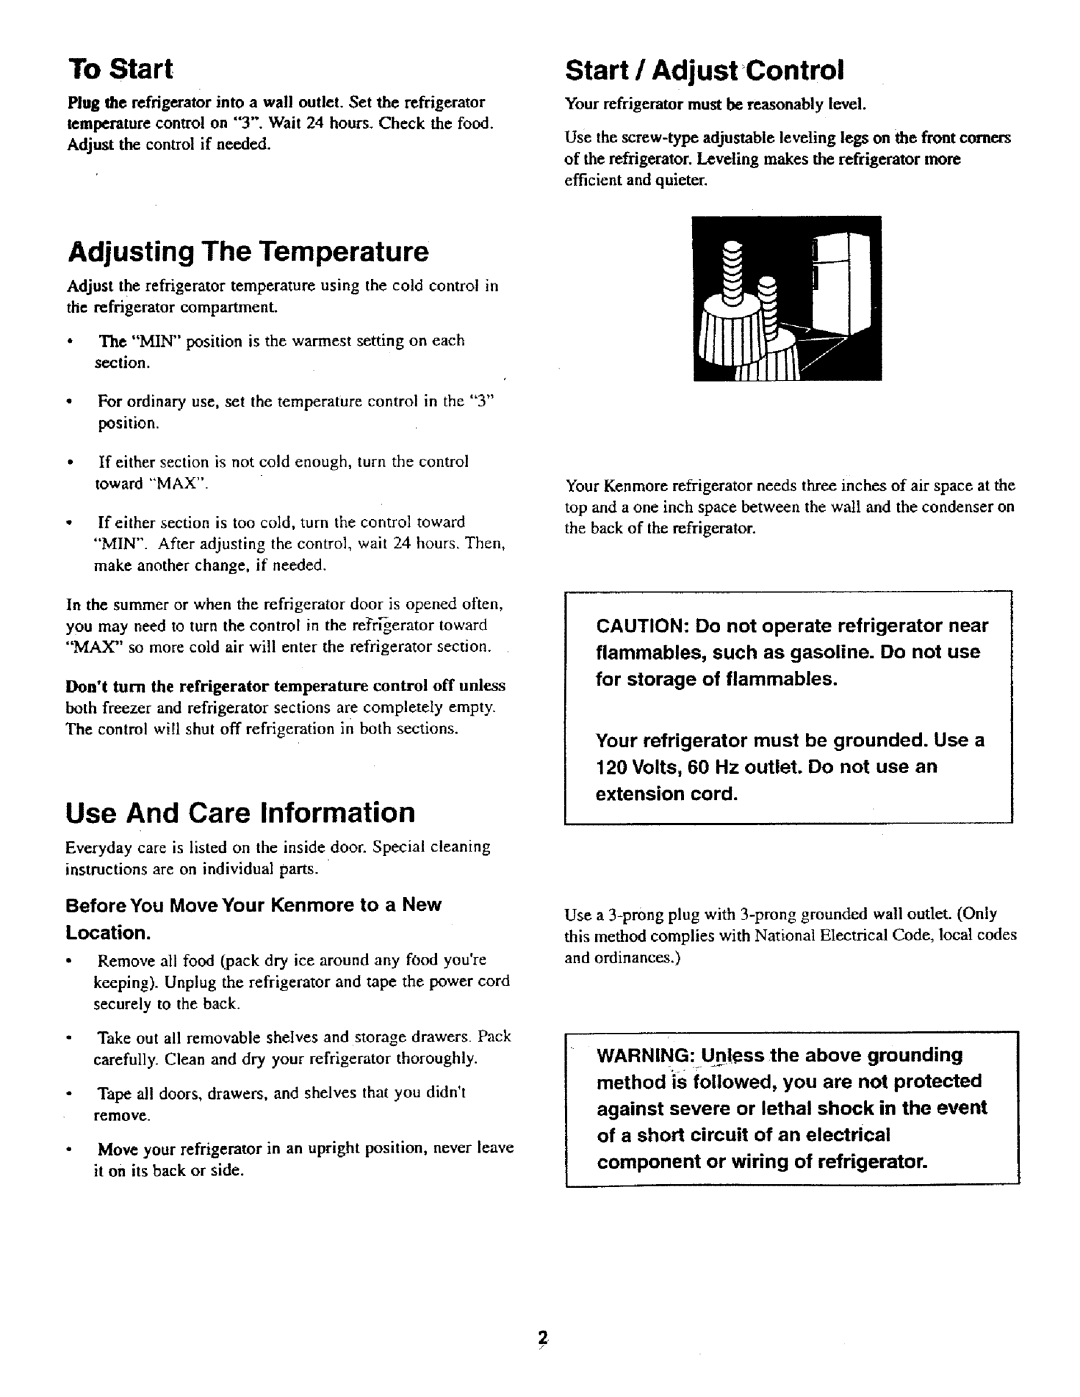 Kenmore 62042 owner manual Use And Care Information, To Start, Start / Adjust Control, Adjusting The Temperature 